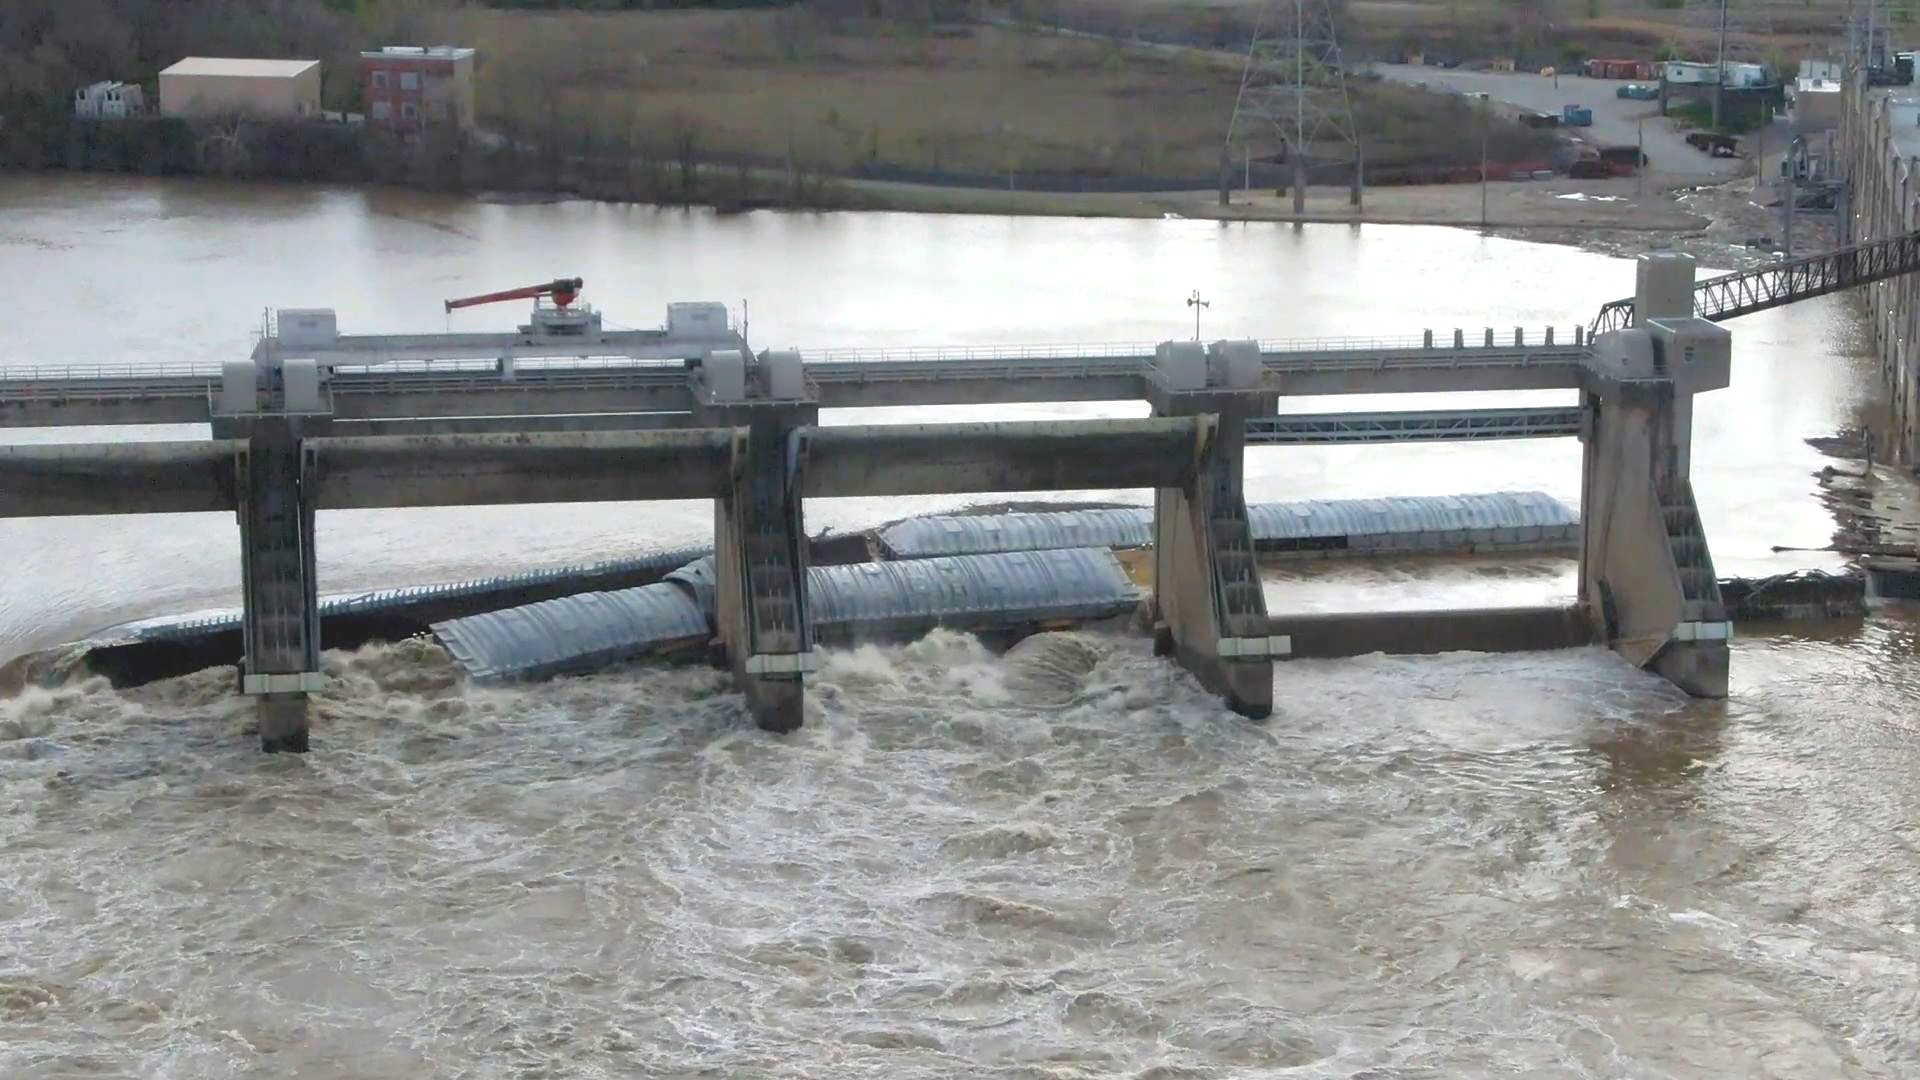 One of the barges was reportedly carrying 1,400 tons of methanol and is partially submerged at the McAlpine Dam.